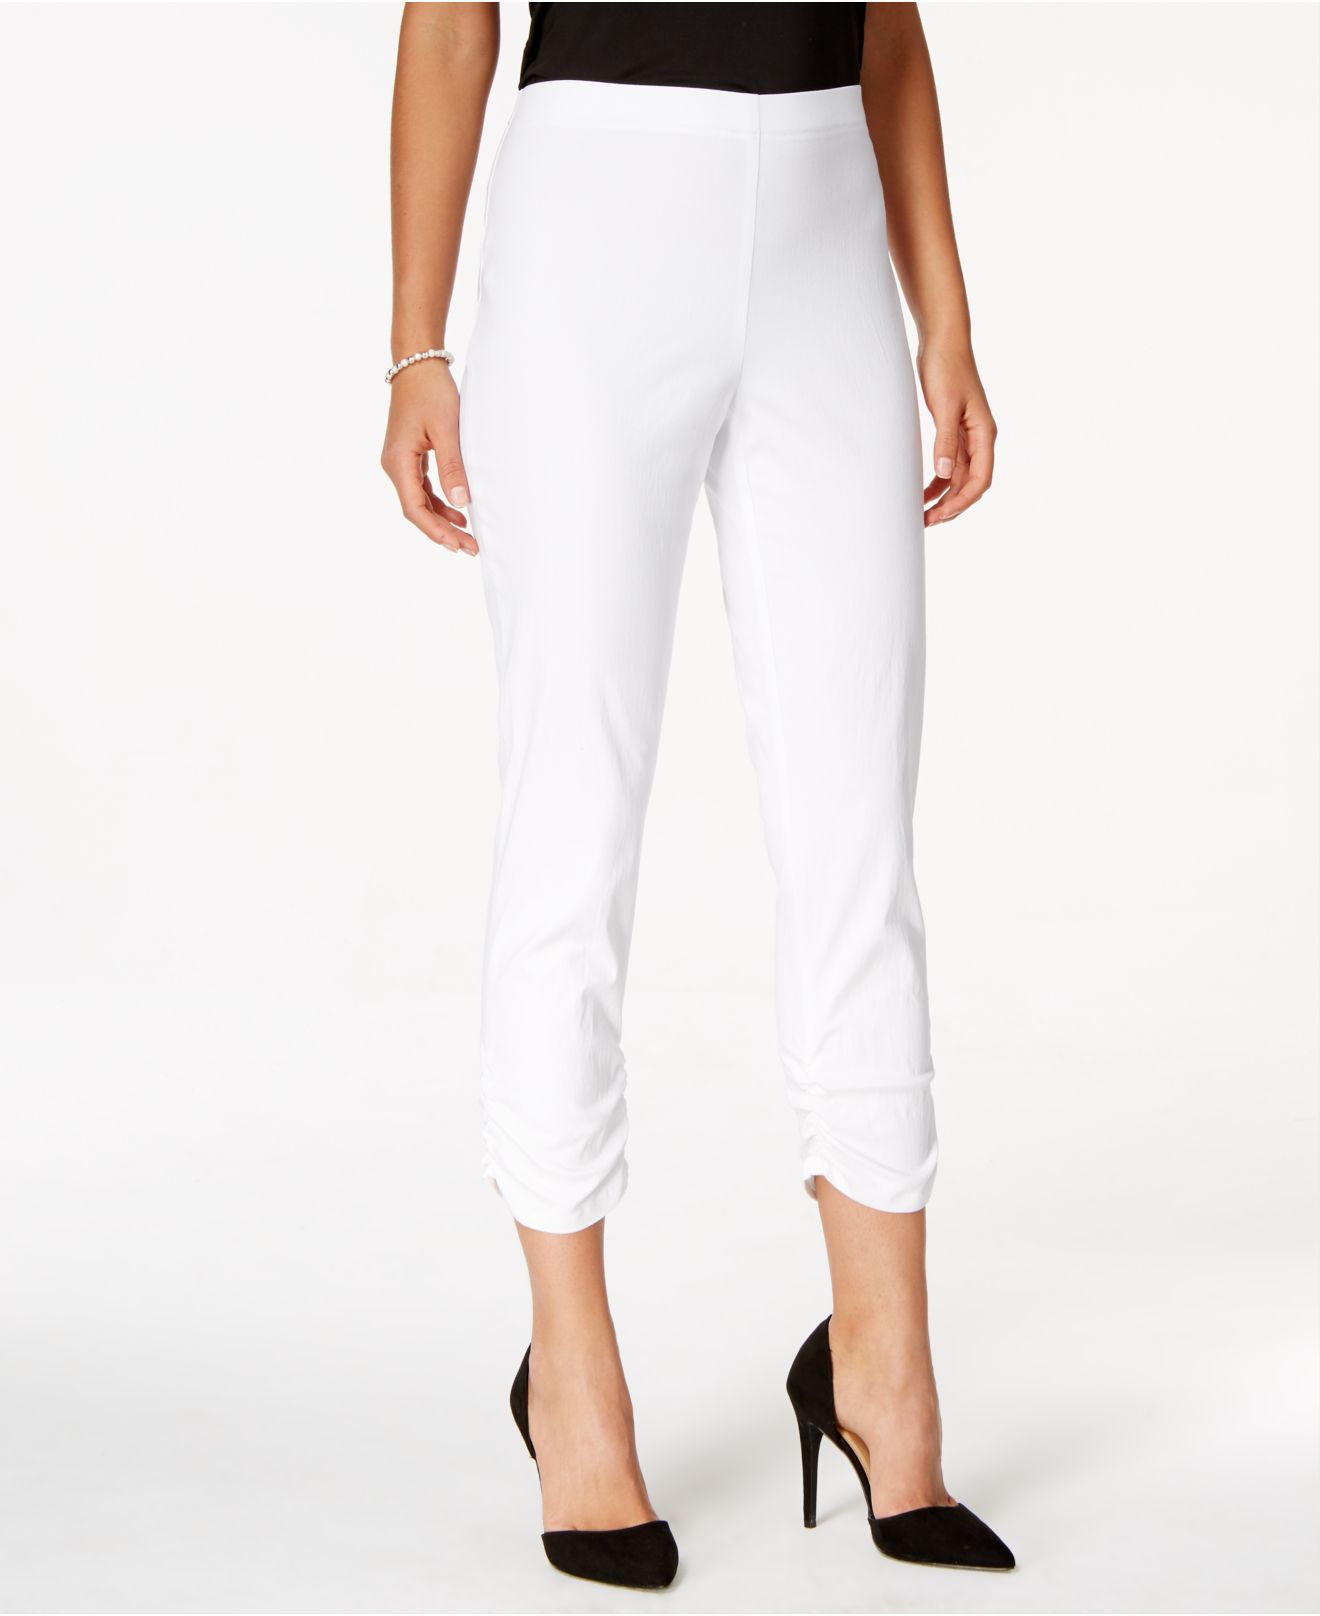 Style & co. Ruched Hem Cropped Skinny Capri Pants, Only At Macy's in ...